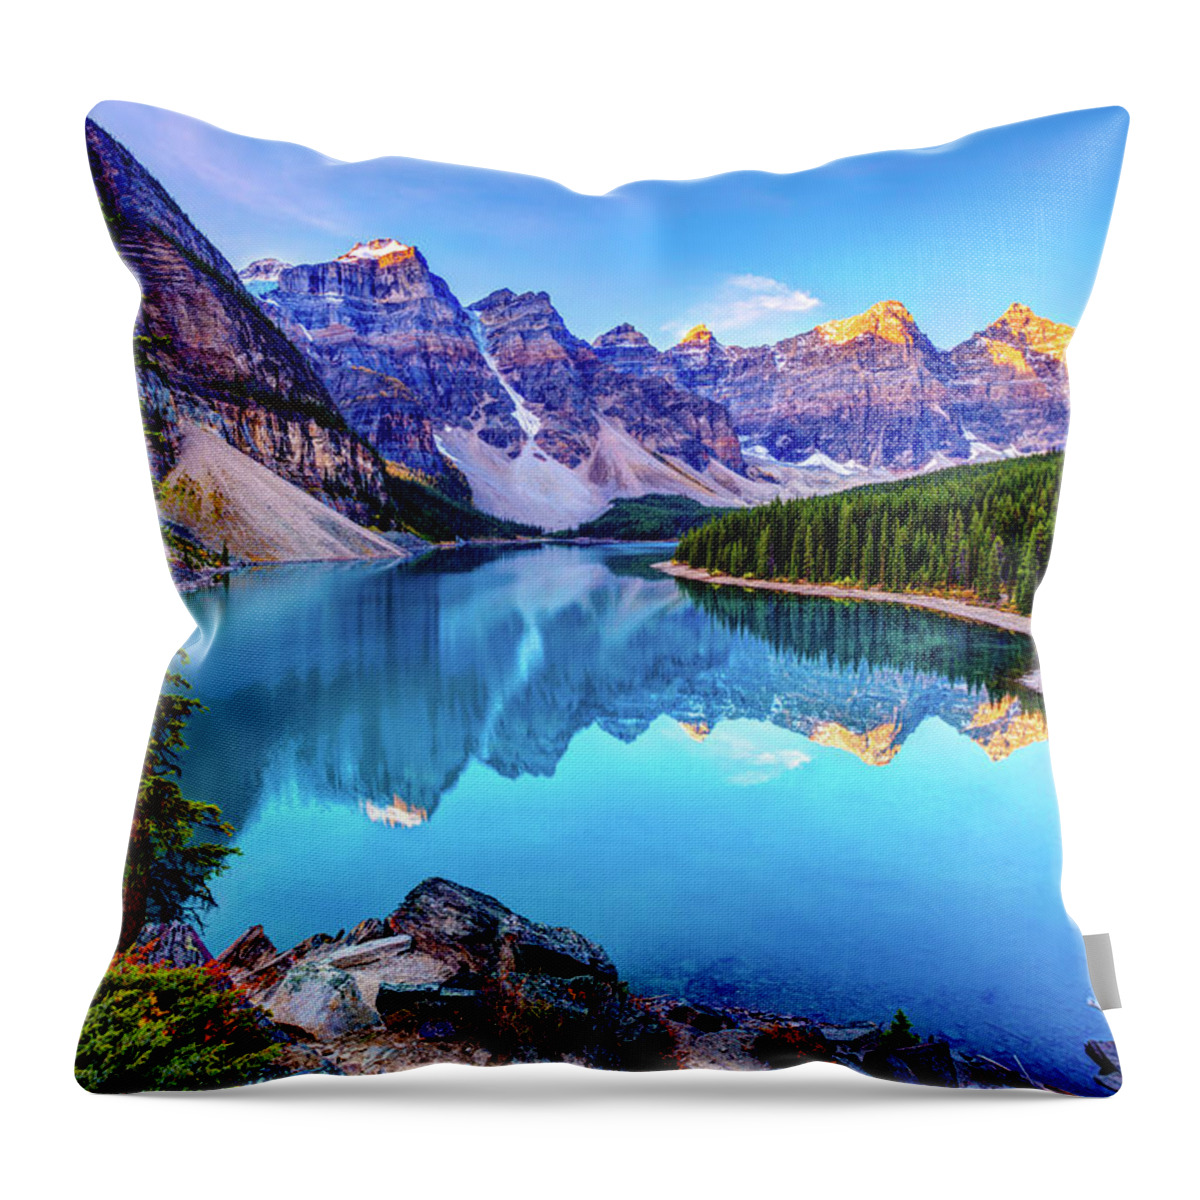 Tranquility Throw Pillow featuring the photograph Sunrise At Moraine Lake by Wan Ru Chen